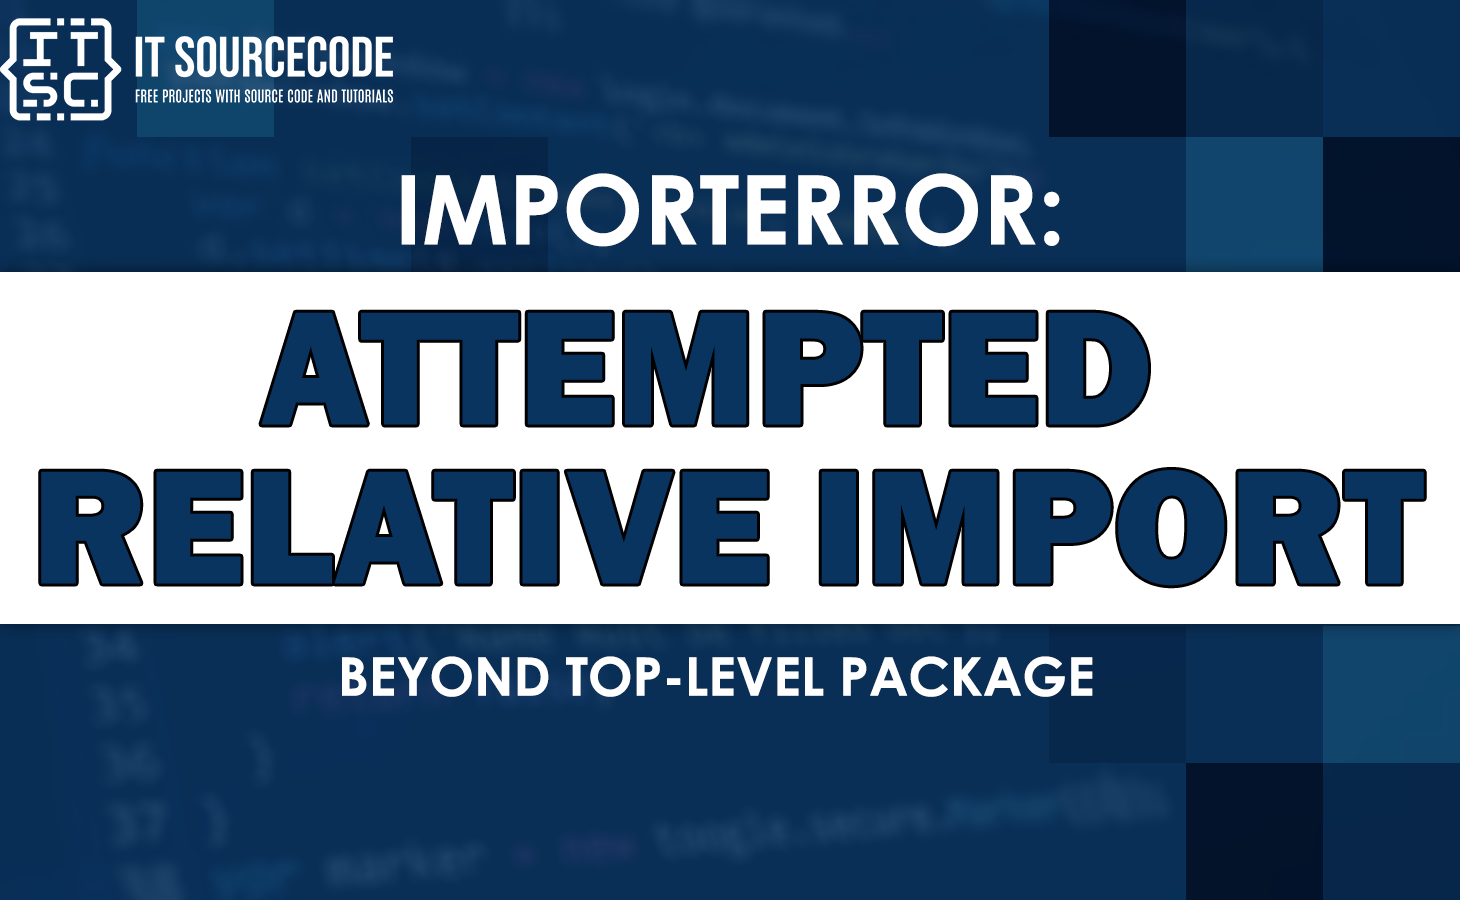 Importerror attempted relative import beyond top-level package